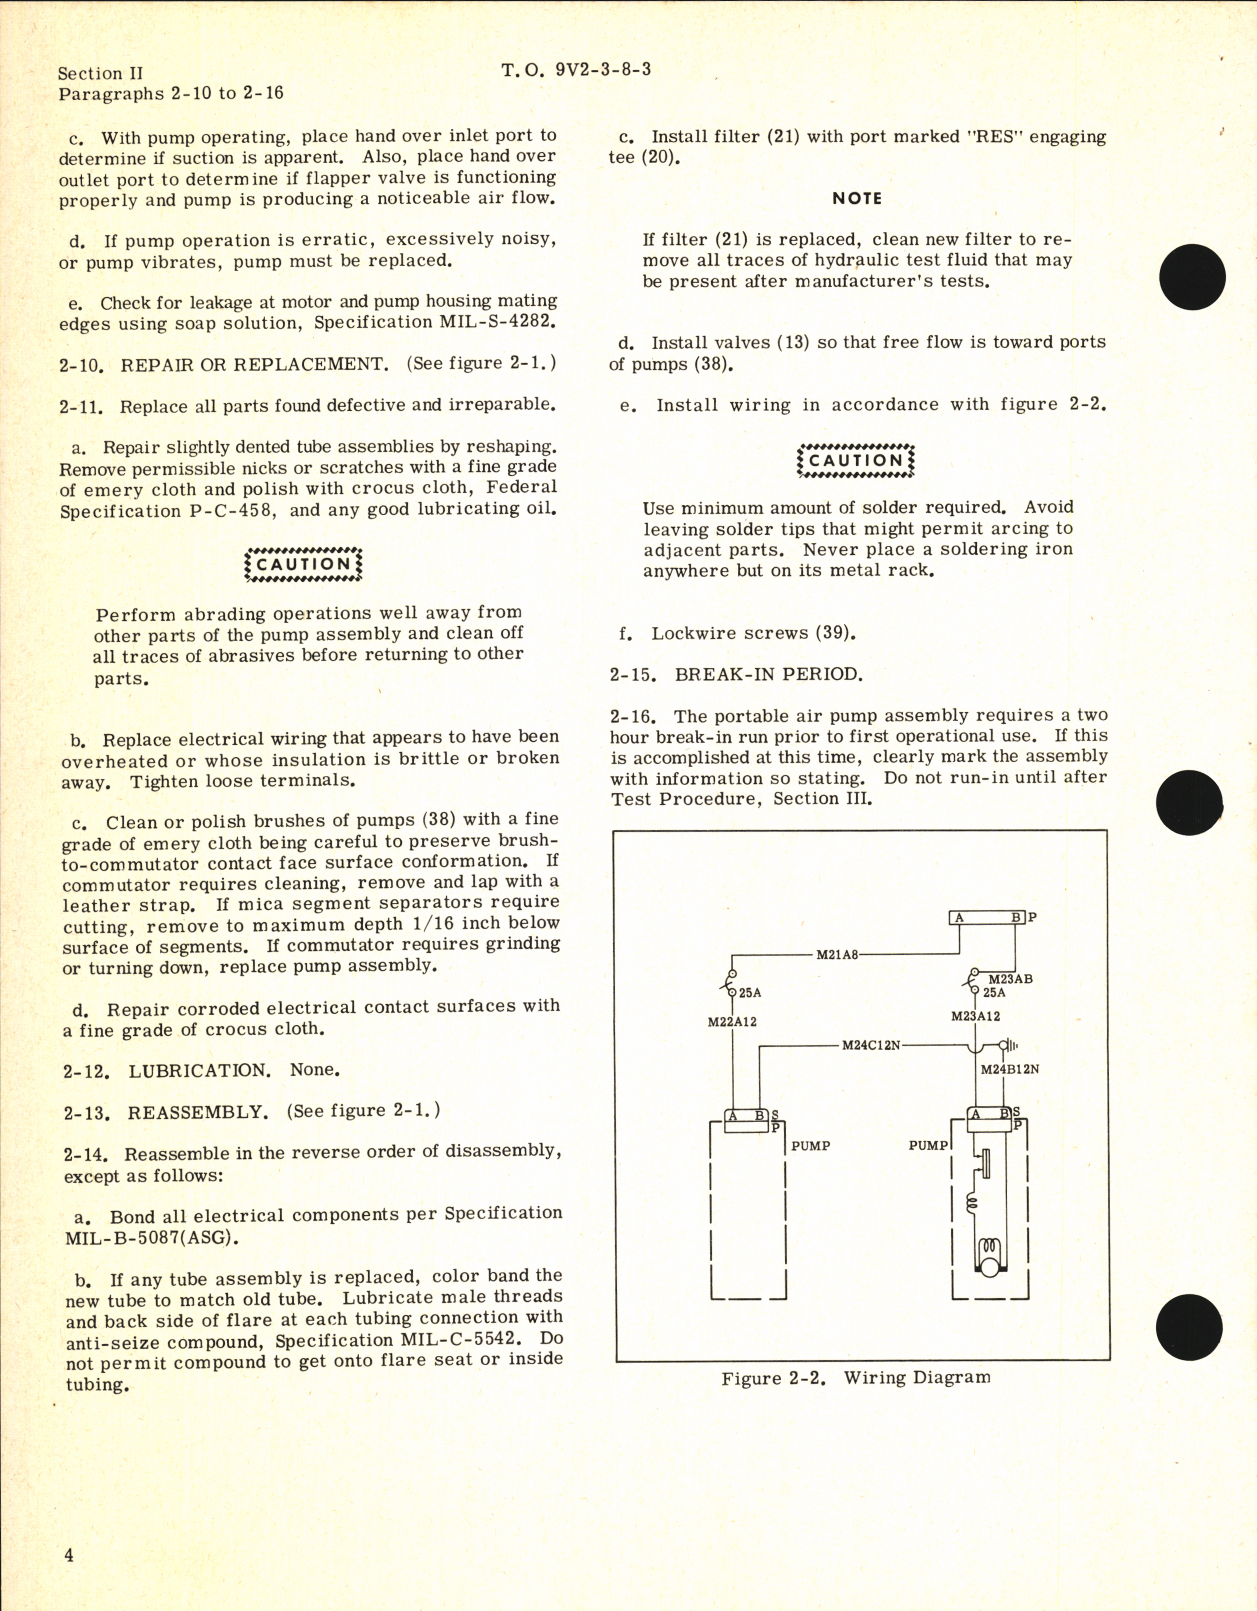 Sample page 4 from AirCorps Library document: Handbook of Overhaul Instructions for H-1 Equipment Portable Air Pump Assembly Part No. 5-36434-9